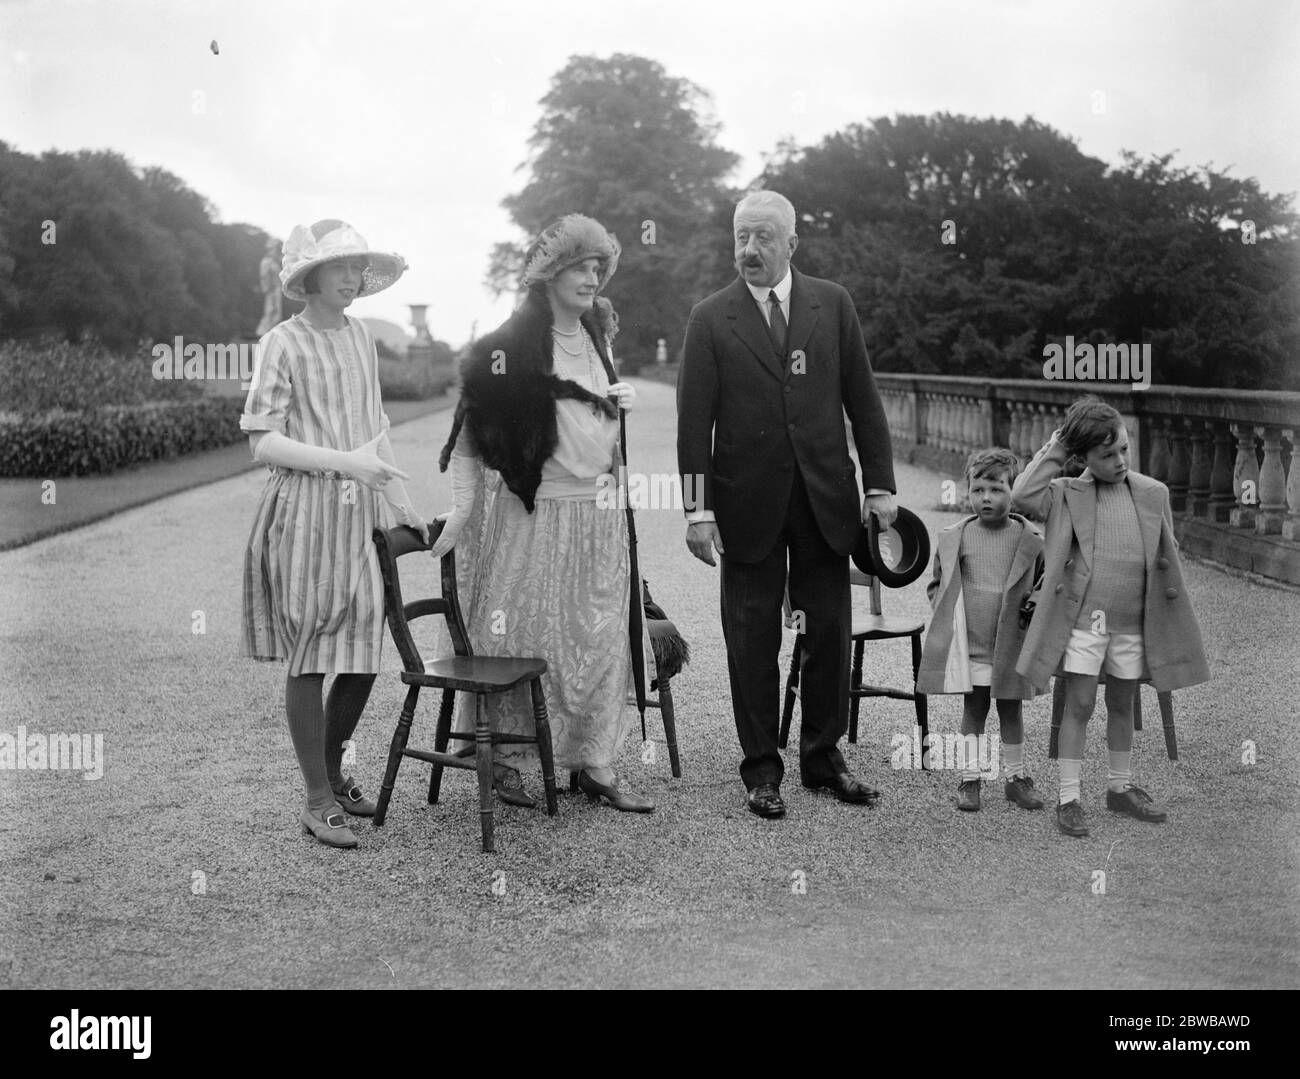 The garden party at Chatsworth House in connection with the wedding of Lady Rachel Cavendish . The Duke and Duchess of Devonshire ( the bride 's parents ) with Lady Anne Cavendish and Lord Hartington 's little sons . 3 August 1923 Stock Photo